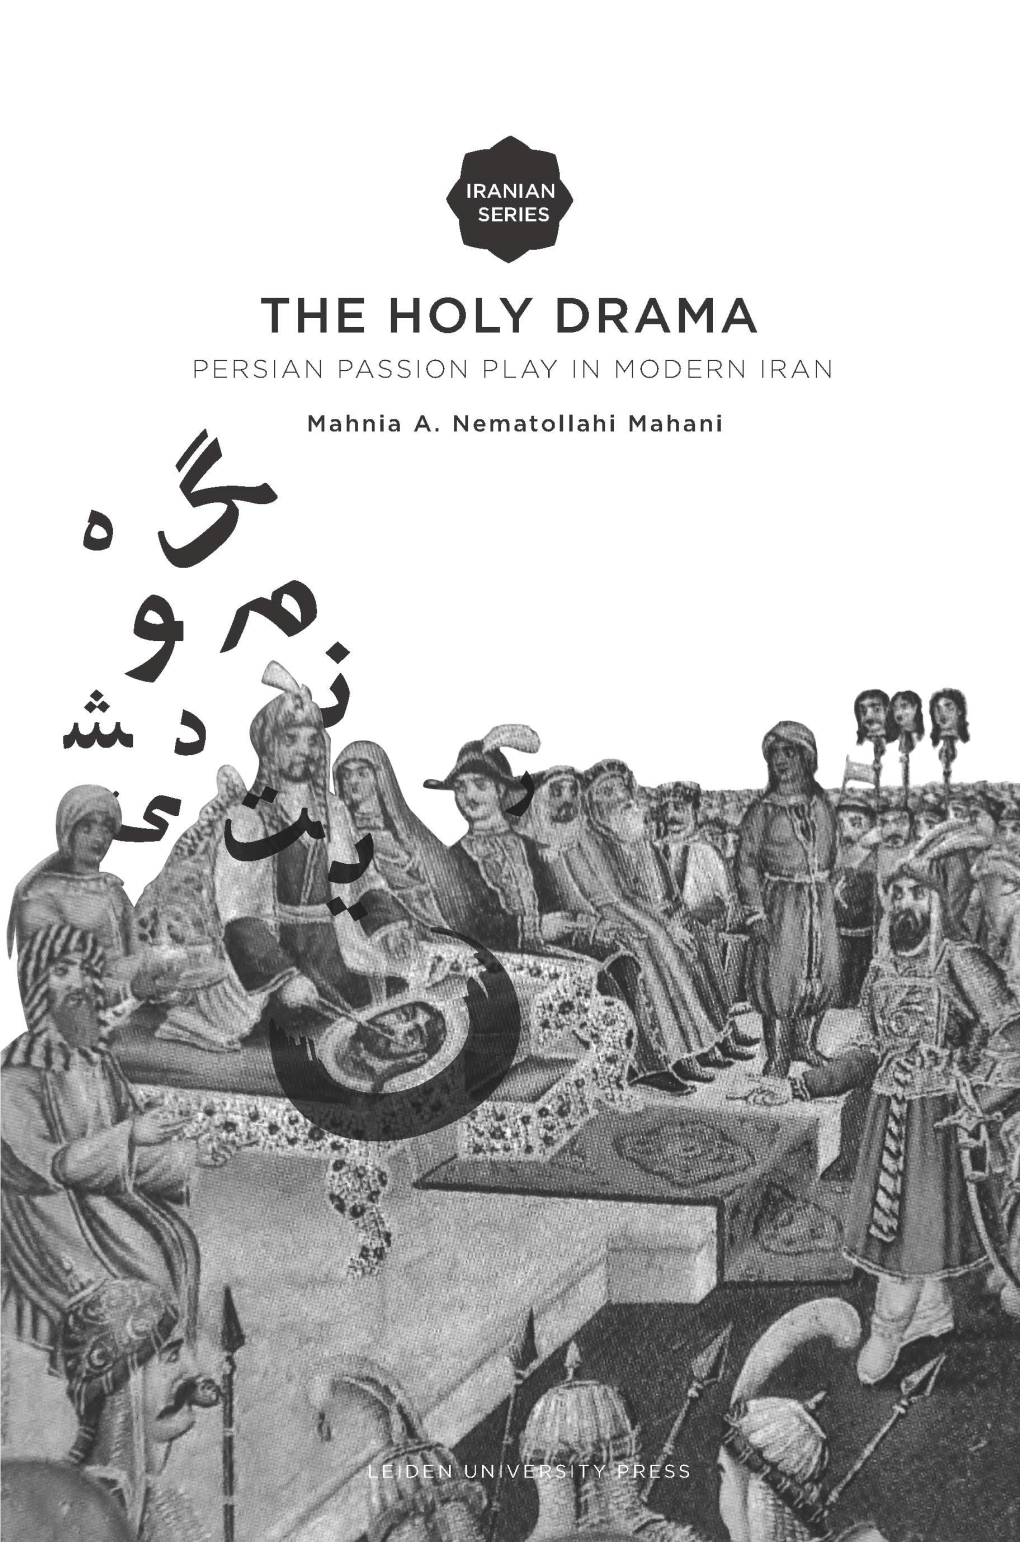 The Holy Drama: Persian Passion Play in Modern Iran